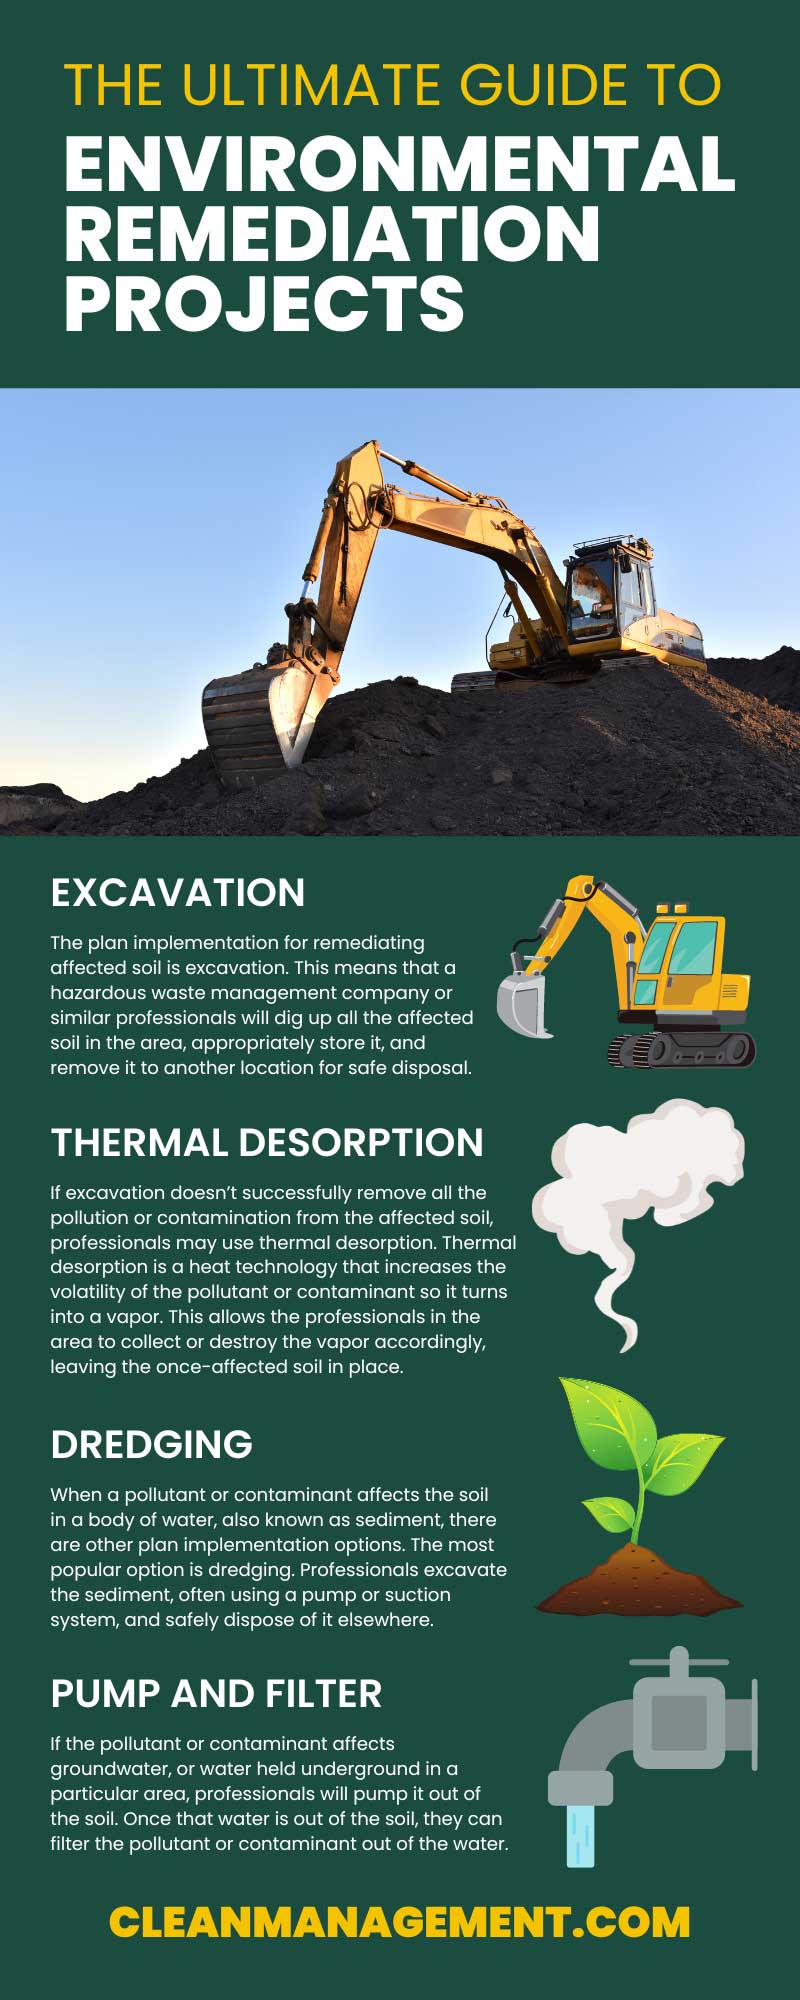 The Ultimate Guide to Environmental Remediation Projects